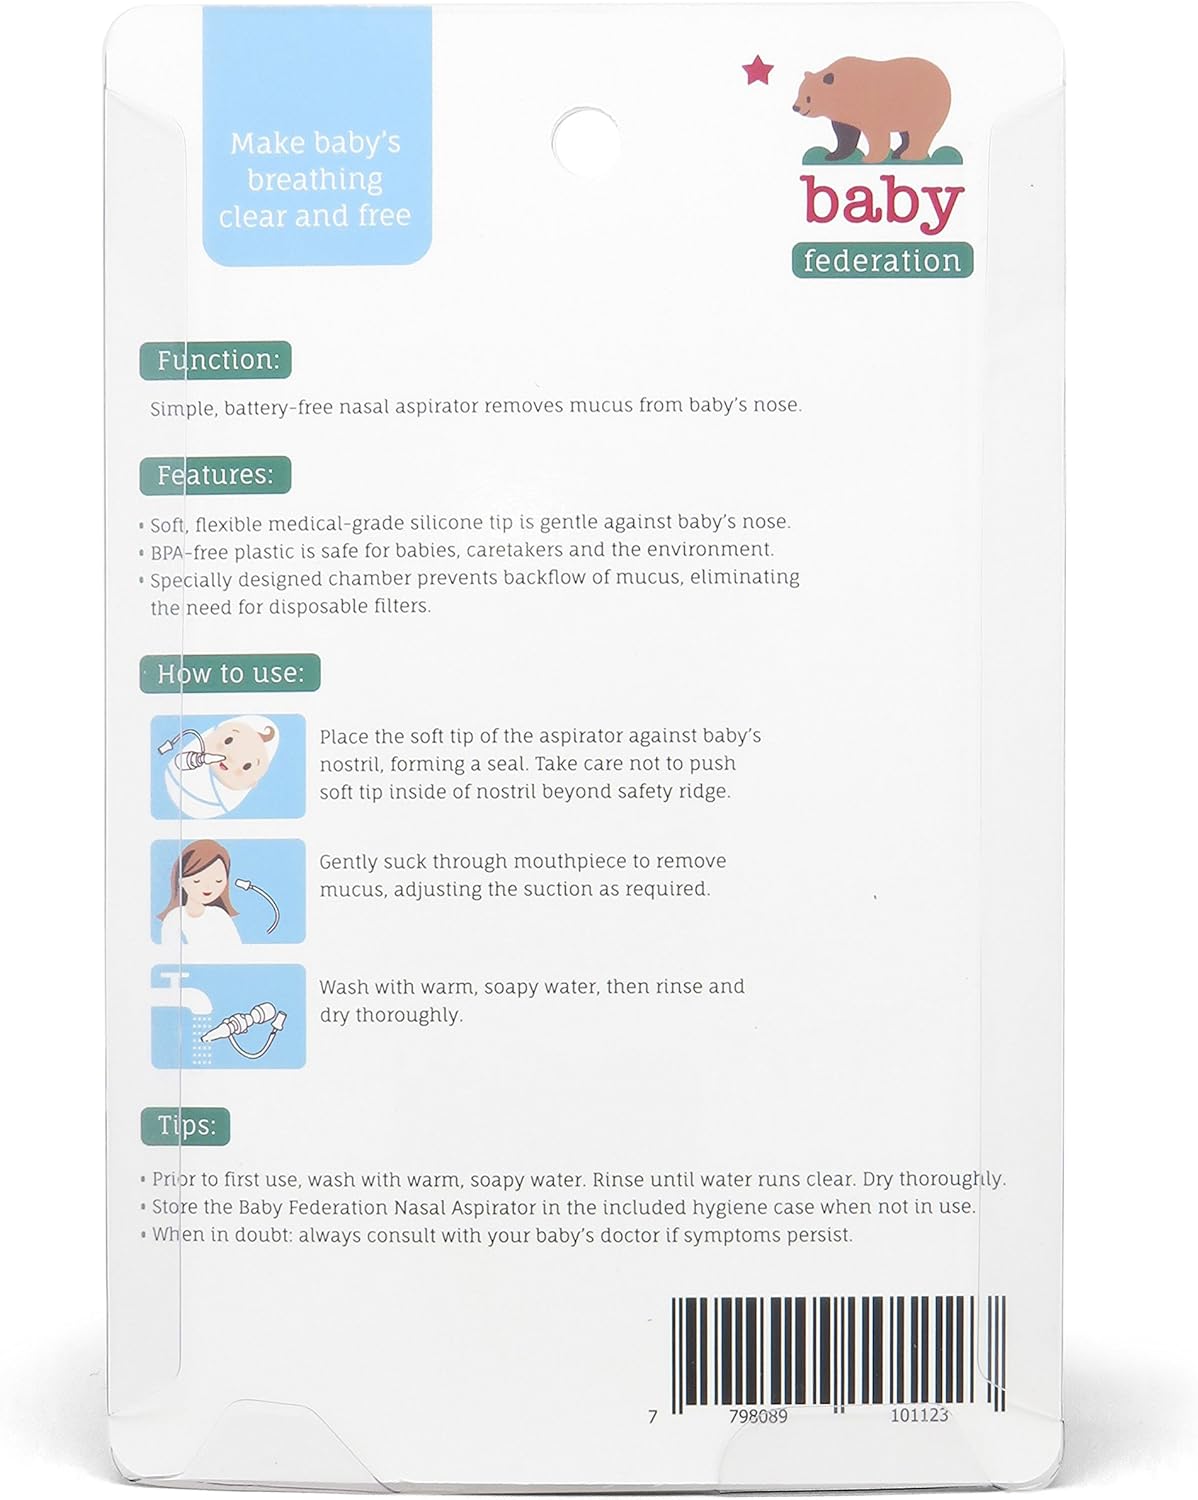 Baby Federation Nasal Aspirator -2 Pack- Compare to Frida Nasal Aspirator - Best Baby Nose Aspirator No Filters Required : Baby